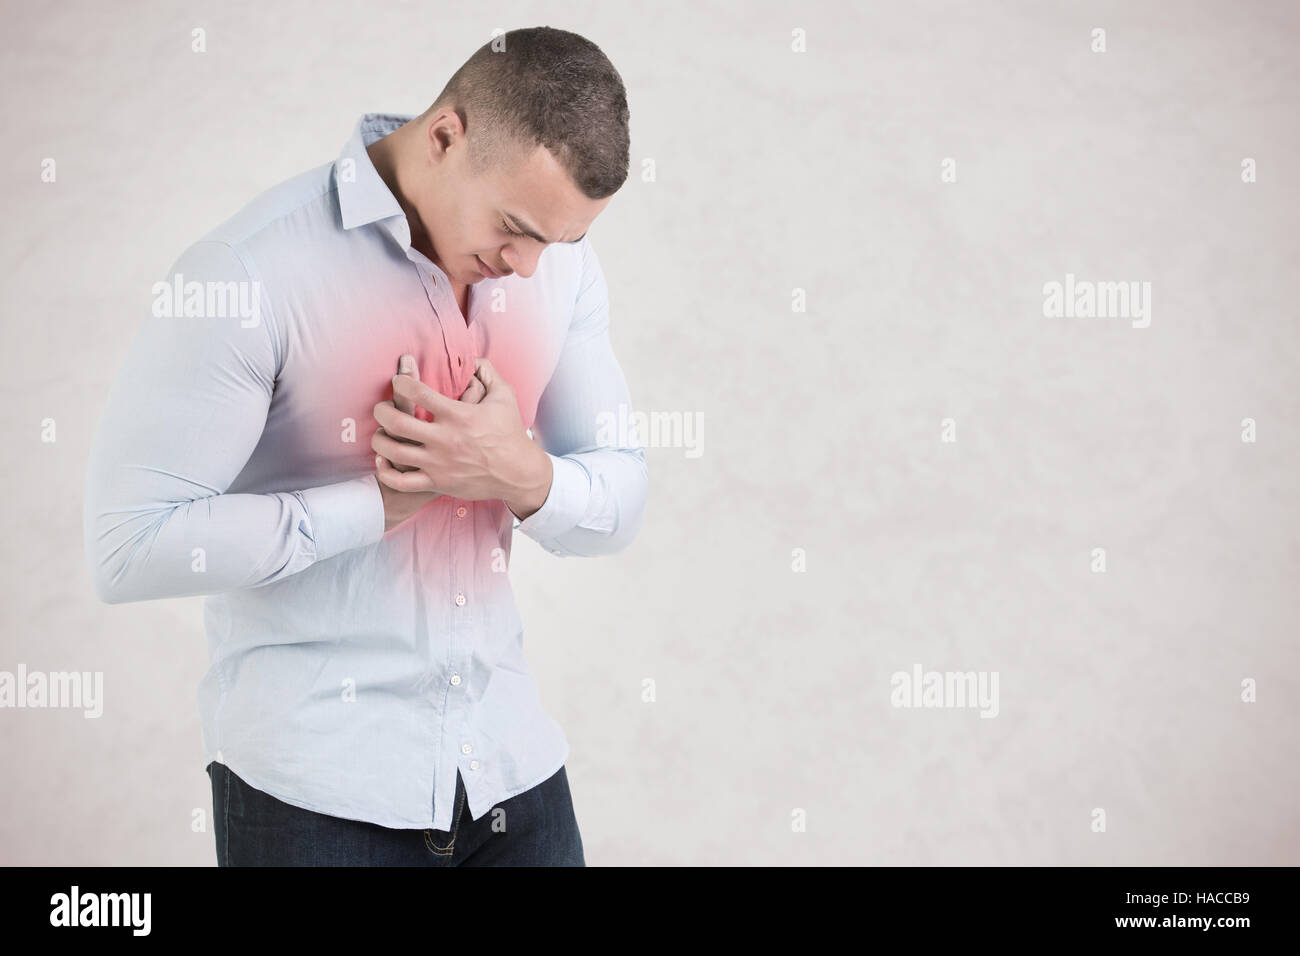 Man having a pain in the heart area Stock Photo